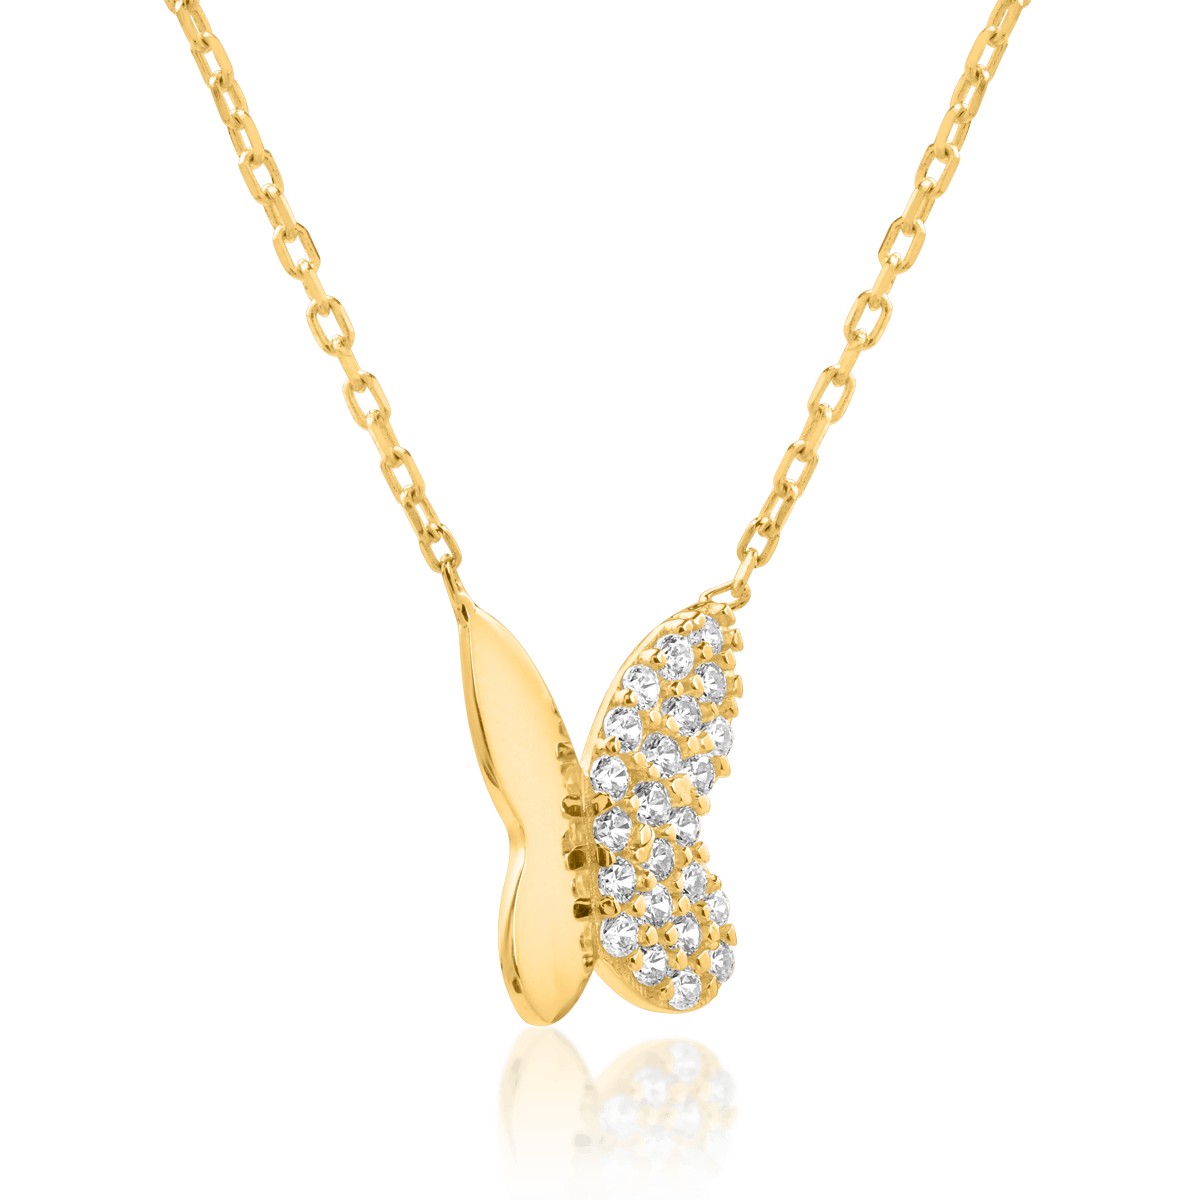 14K yellow gold pendant butterfly necklace